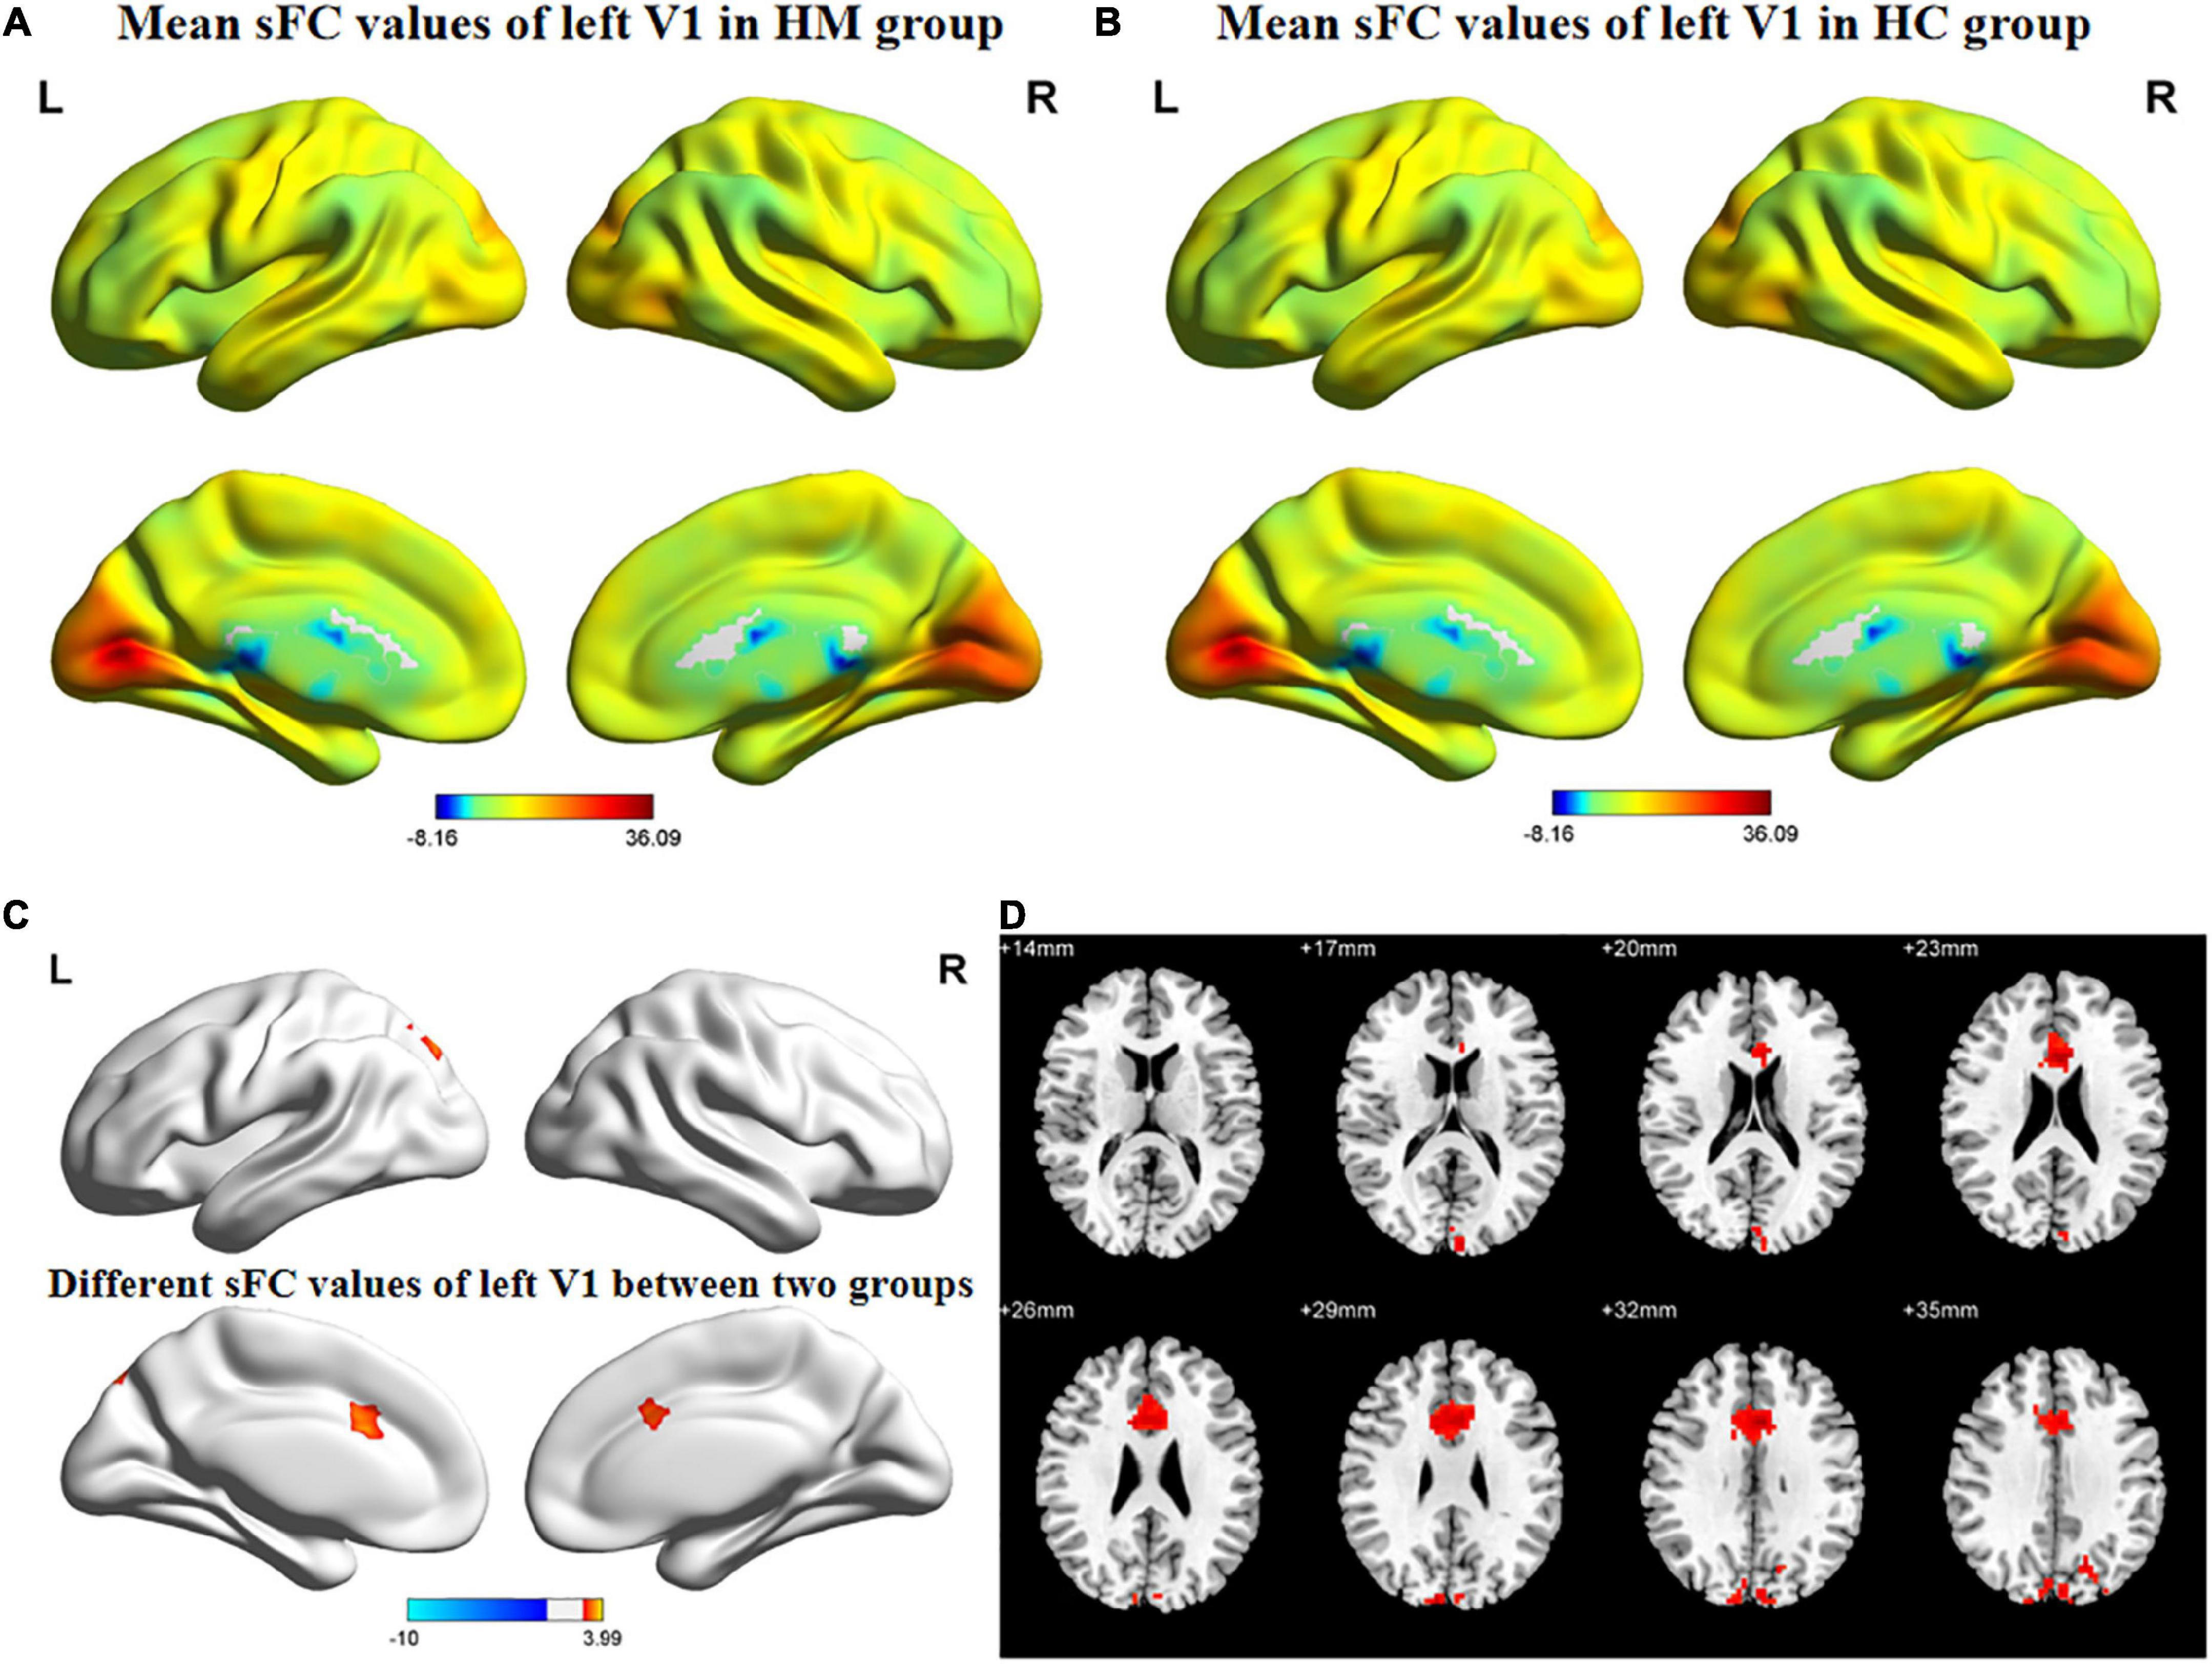 Exploration of static functional connectivity and dynamic functional connectivity alterations in the primary visual cortex among patients with high myopia via seed-based functional connectivity analysis